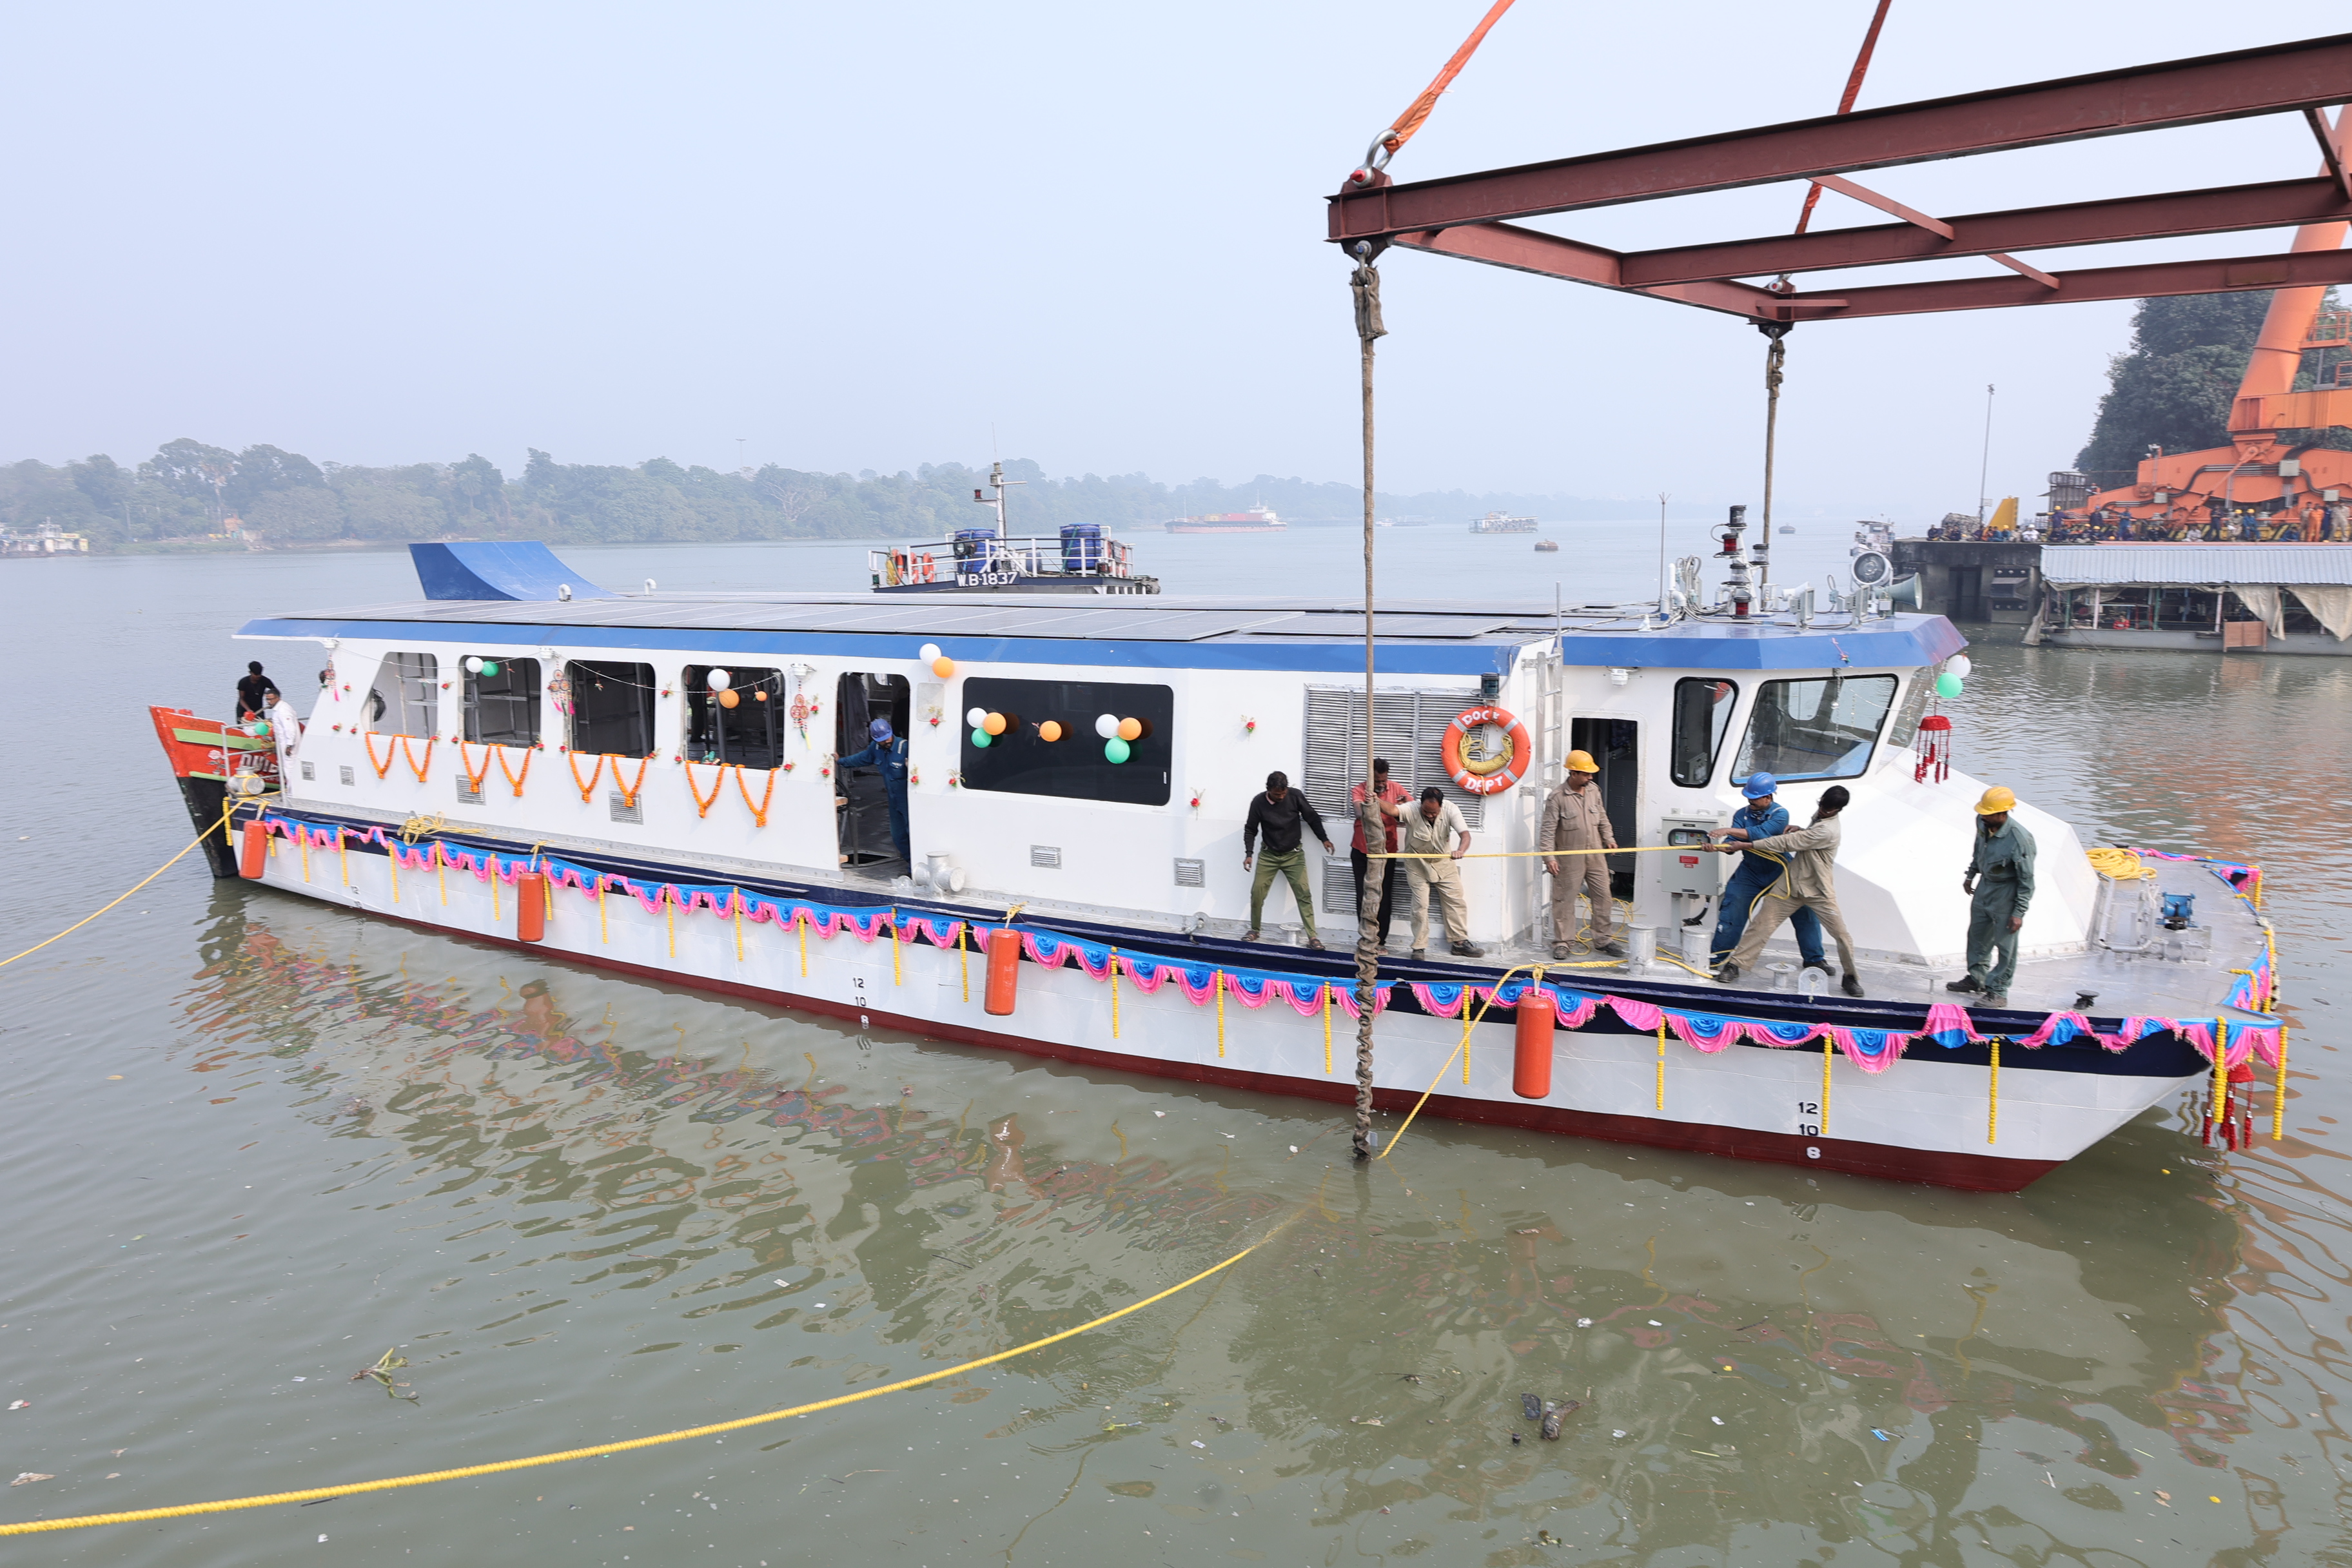 GRSE launches State's First Next-Generation Electric Ferry for the Government of West Bengal on 11 Jan 24